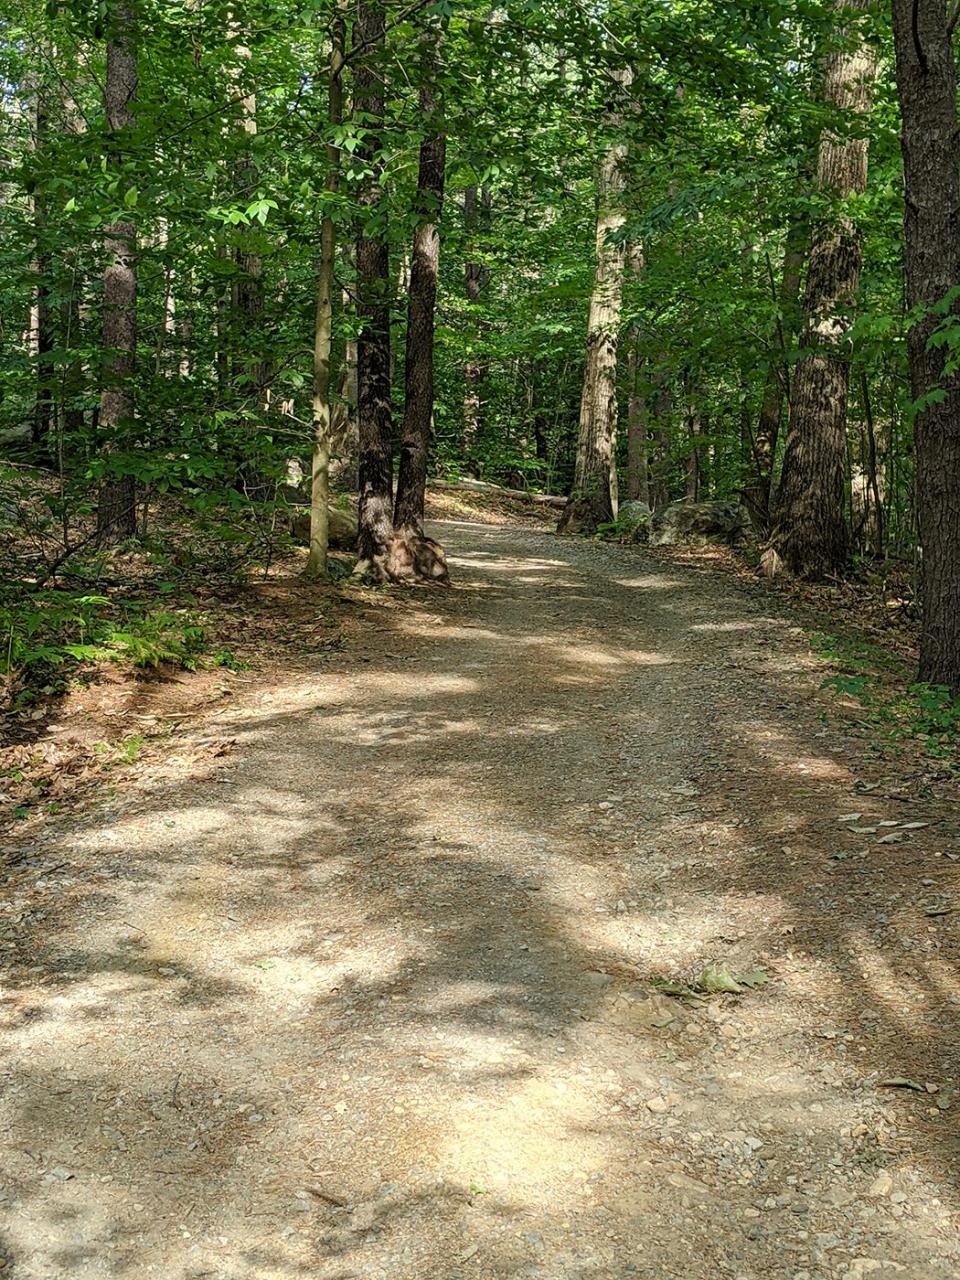 The Woodland Trail at Dunn State Park in Gardner is accessible to wheelchairs and strollers thanks to its packed stone dust surface.